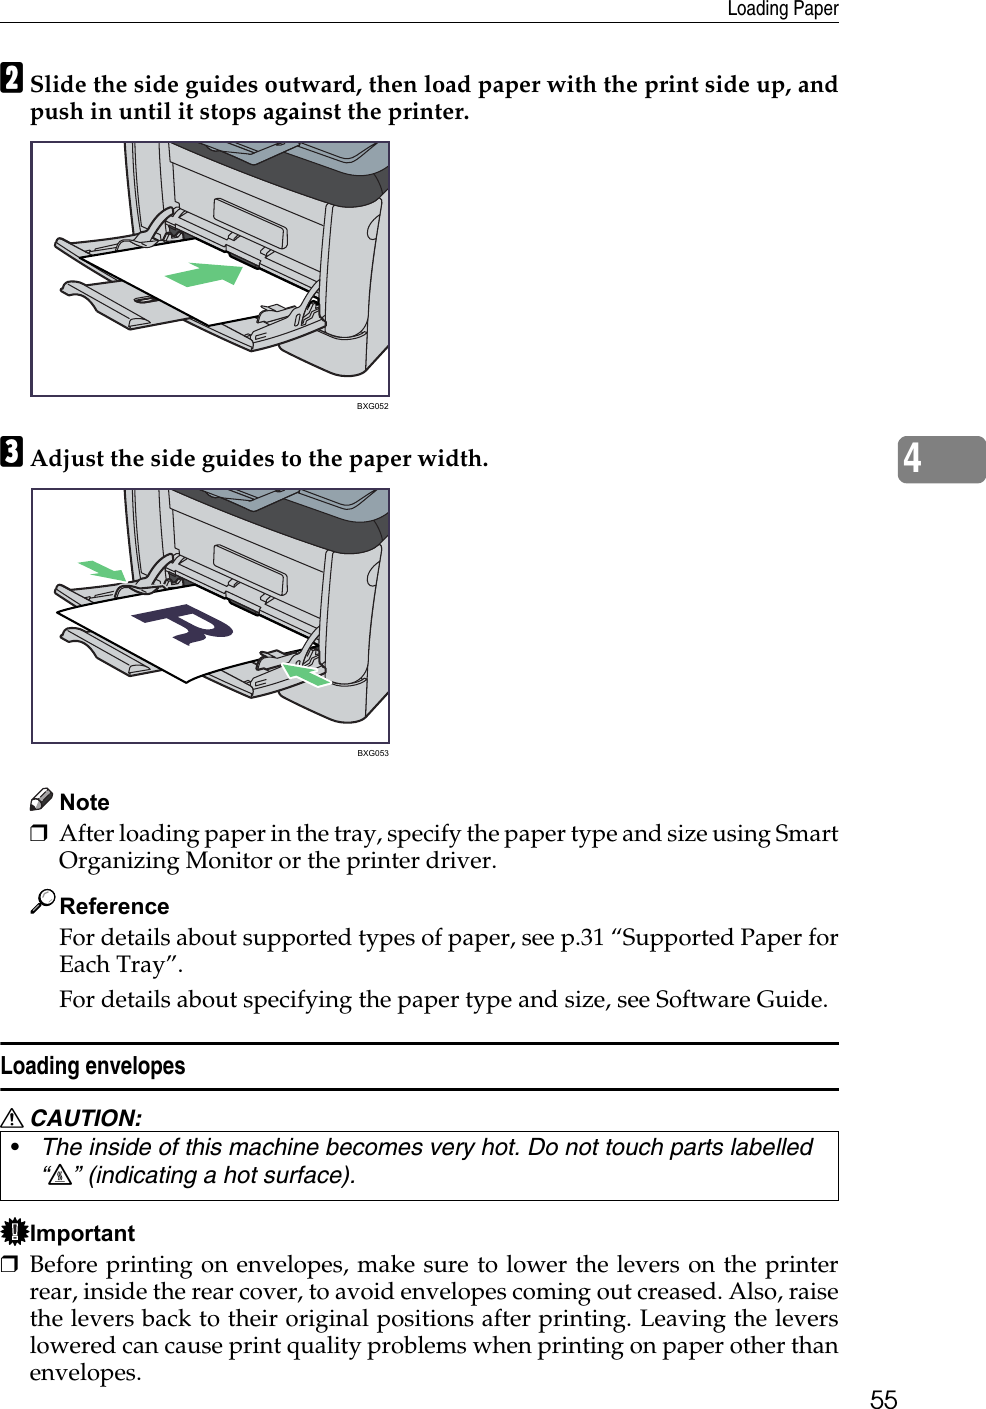 Loading Paper554BSlide the side guides outward, then load paper with the print side up, andpush in until it stops against the printer.CAdjust the side guides to the paper width.Note❒After loading paper in the tray, specify the paper type and size using SmartOrganizing Monitor or the printer driver.ReferenceFor details about supported types of paper, see p.31 “Supported Paper forEach Tray”.For details about specifying the paper type and size, see Software Guide.Loading envelopesR CAUTION:Important❒Before printing on envelopes, make sure to lower the levers on the printerrear, inside the rear cover, to avoid envelopes coming out creased. Also, raisethe levers back to their original positions after printing. Leaving the leverslowered can cause print quality problems when printing on paper other thanenvelopes.•The inside of this machine becomes very hot. Do not touch parts labelled “v” (indicating a hot surface).BXG052BXG053